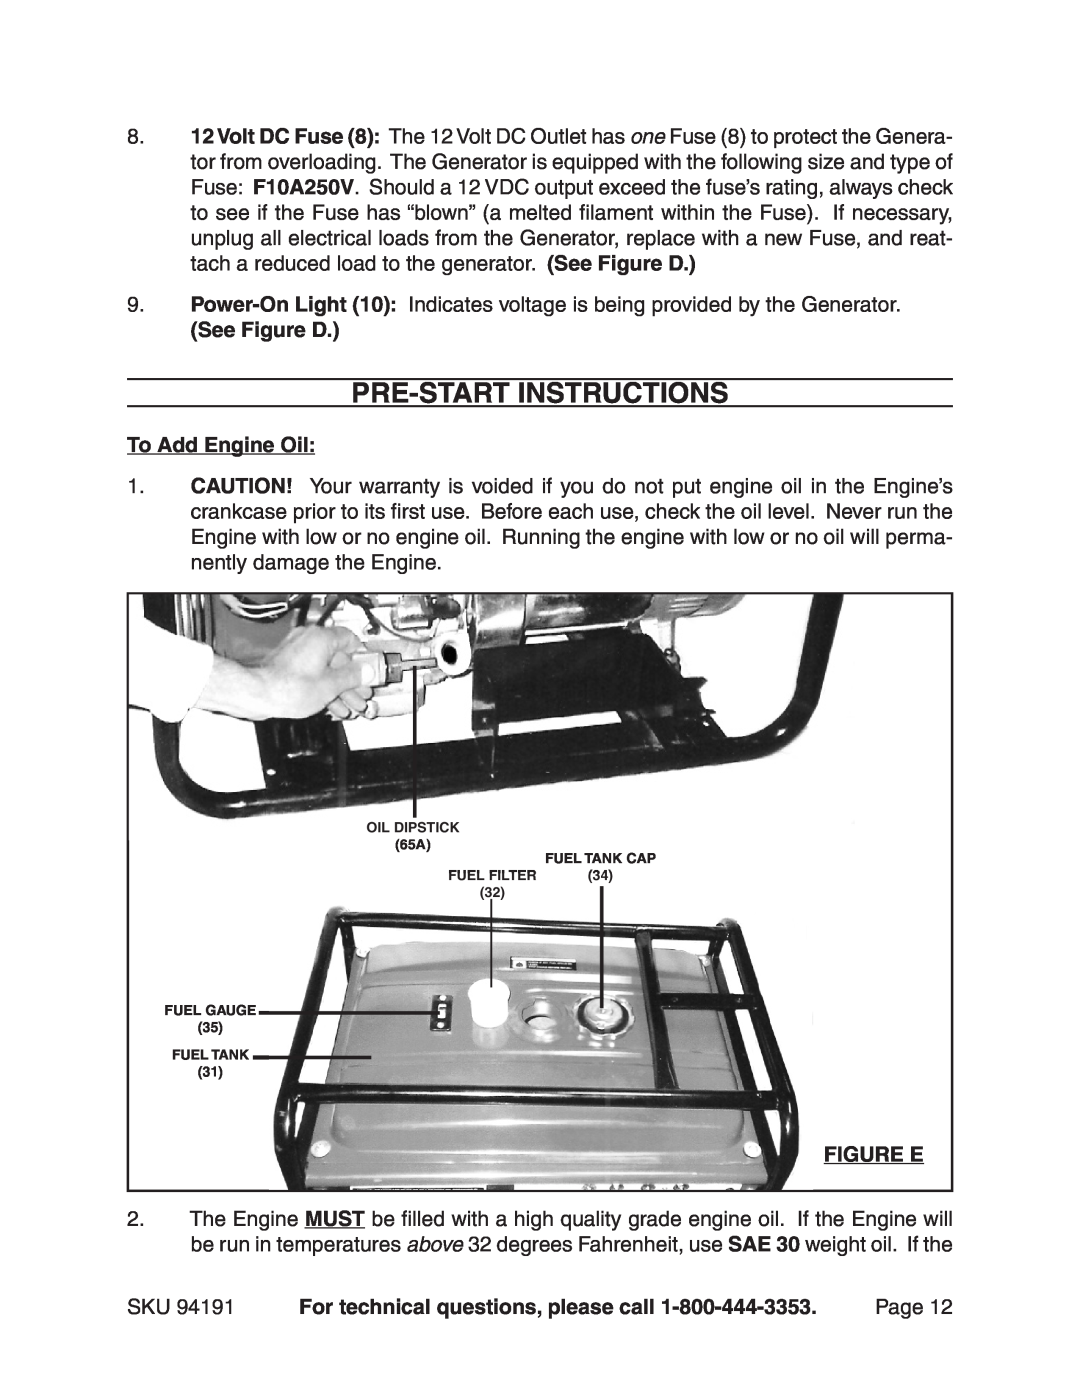 Harbor Freight Tools 94191 warranty Pre-Start Instructions, To Add Engine Oil, Figure E, See Figure D 